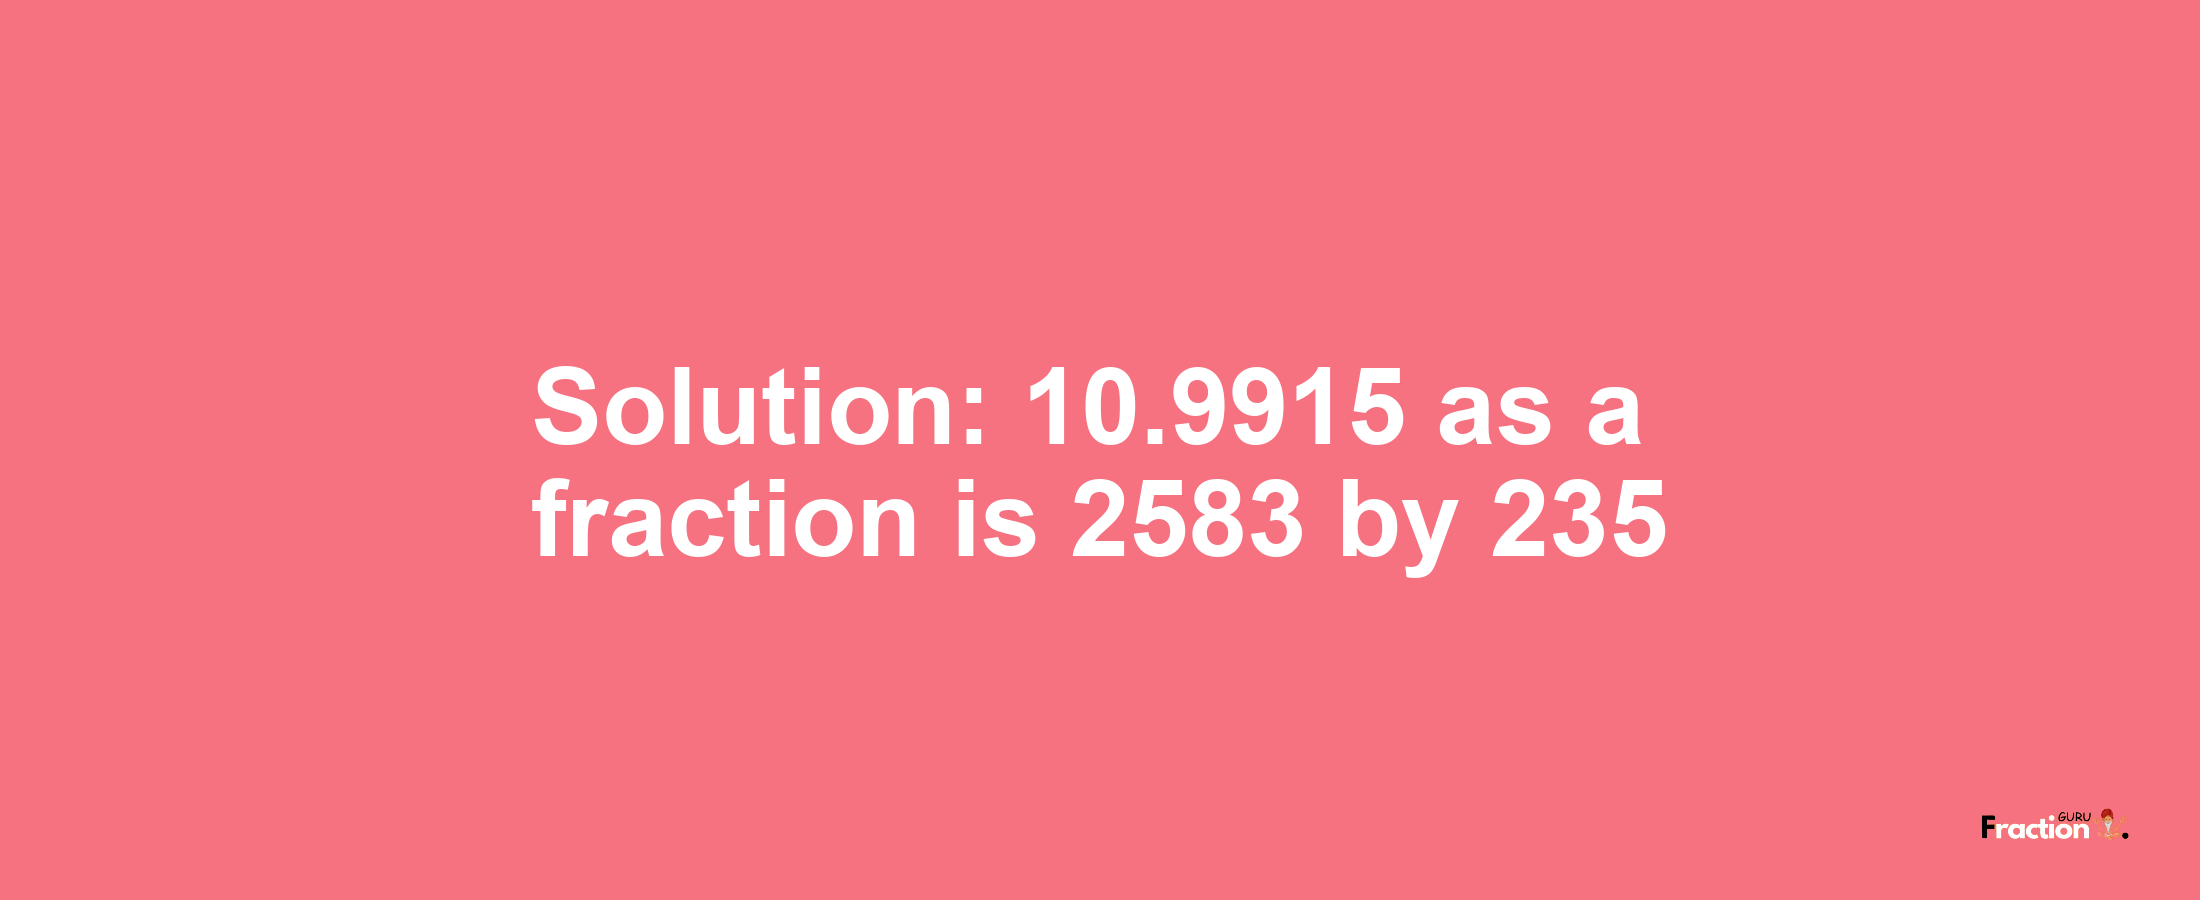 Solution:10.9915 as a fraction is 2583/235